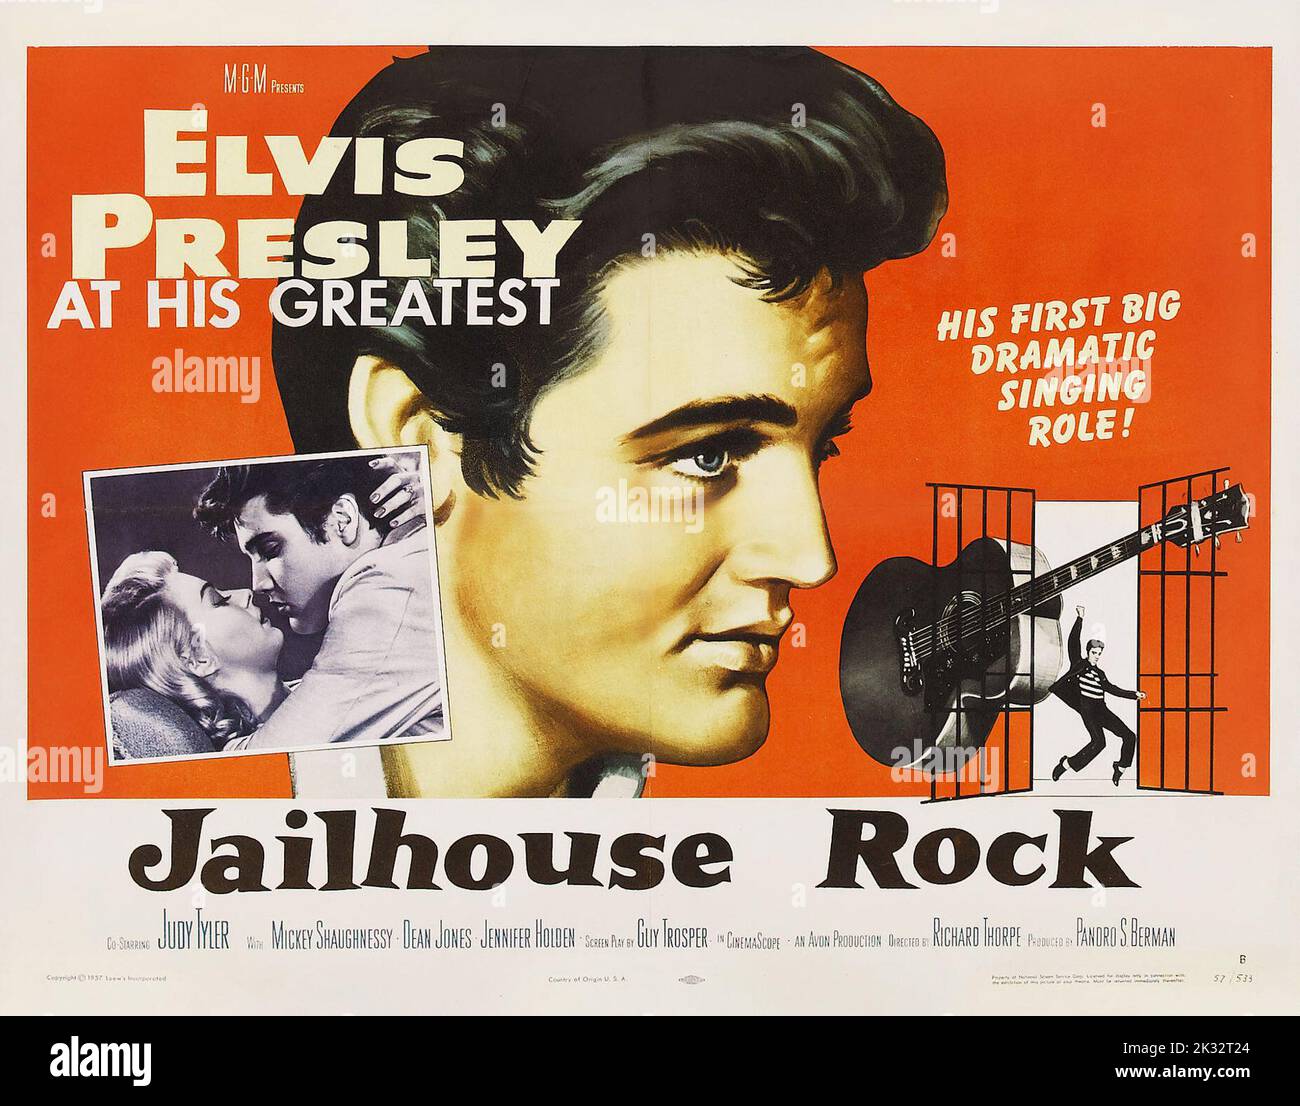 Elvis Presley at his greatest - style B movie poster Jailhouse Rock (MGM, 1957). Half Sheet film poster. Stock Photo